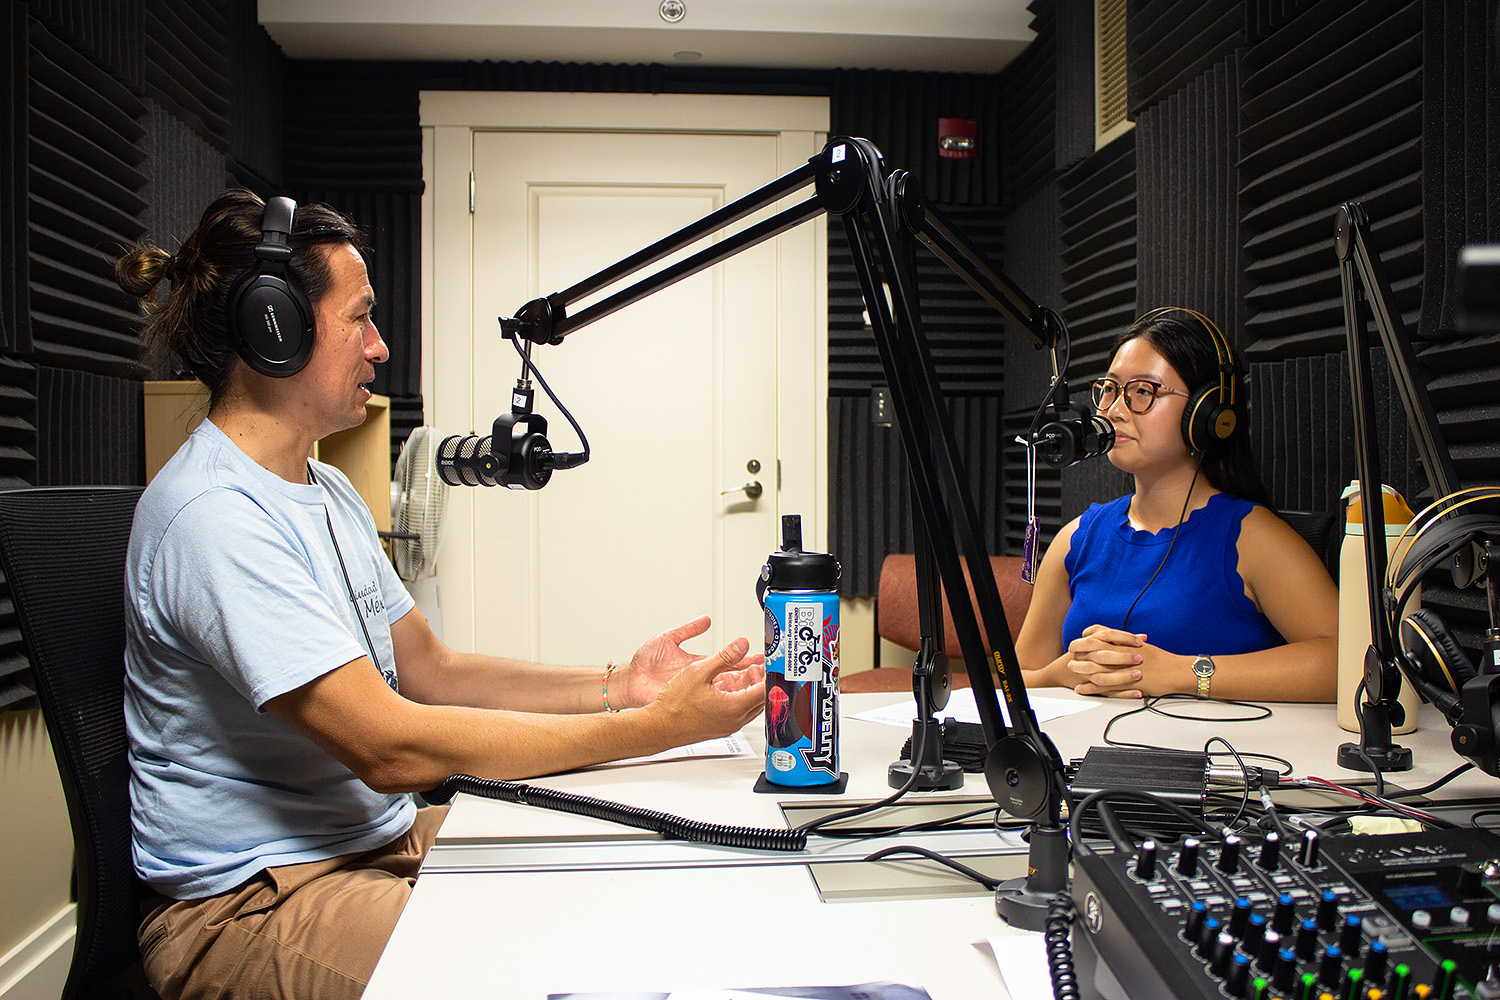 Jason Chang and Karen Lau sit in front of microphones in a recording studio.